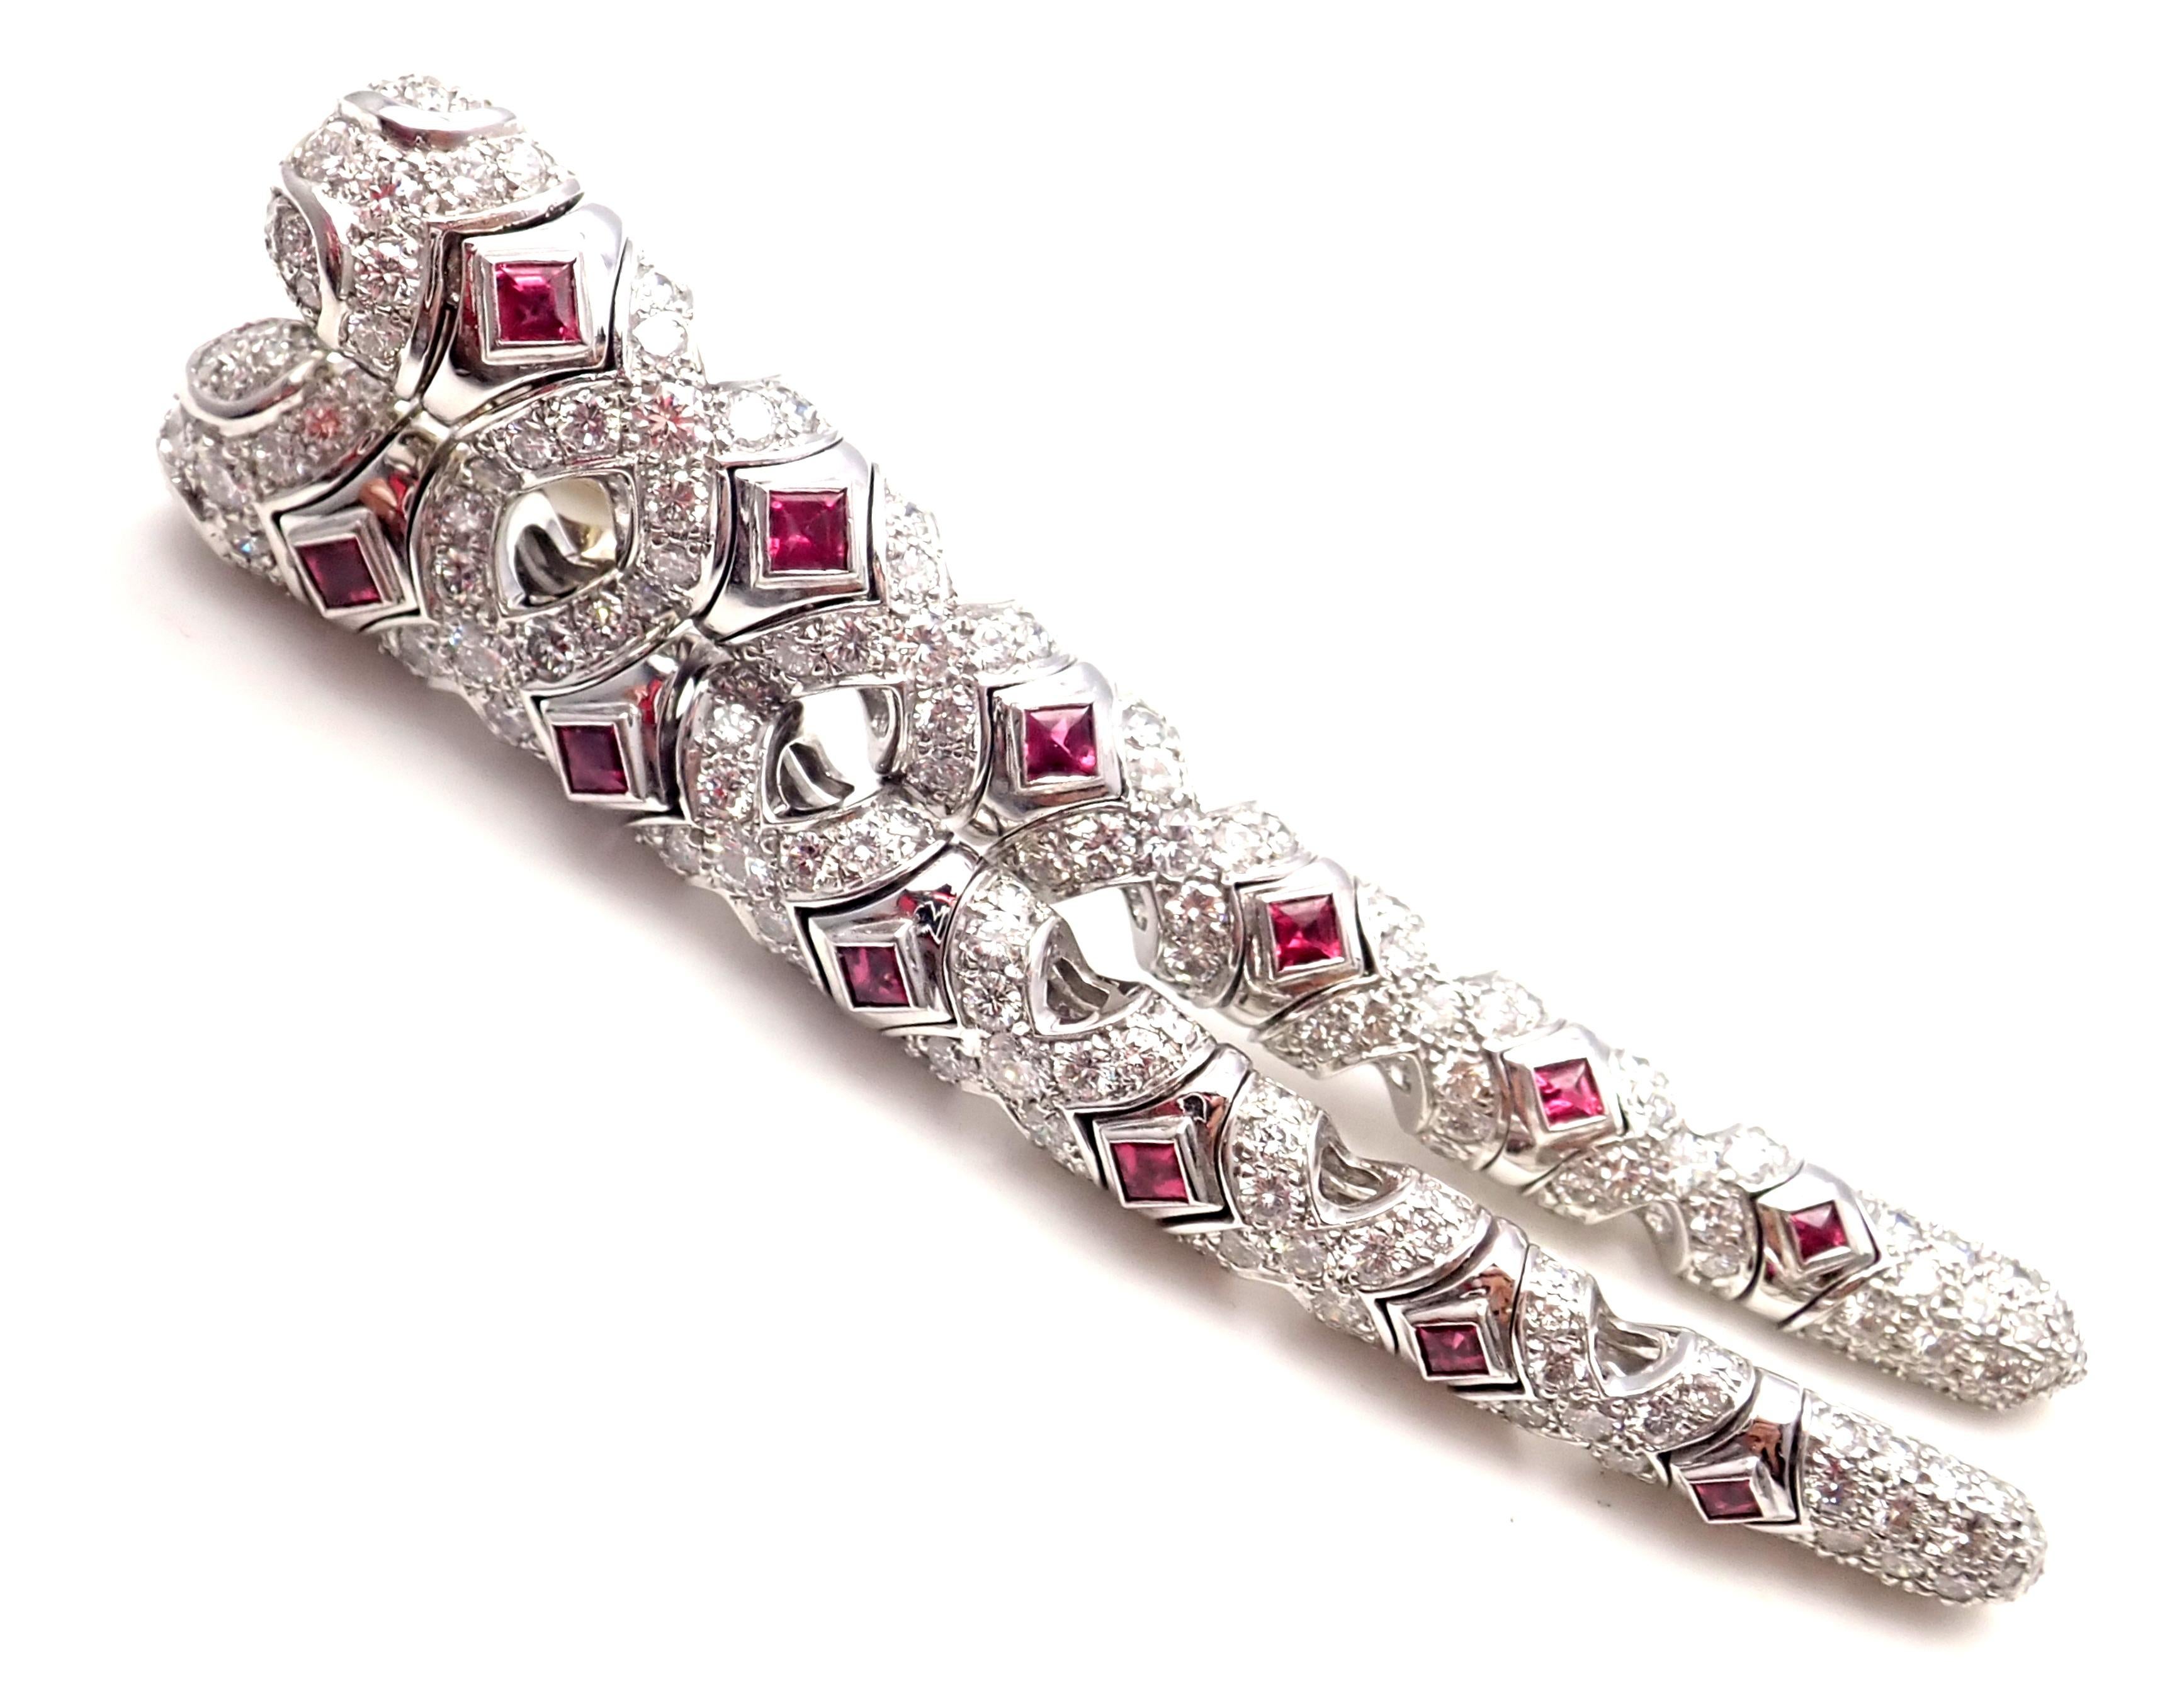 18k White Gold Diamond And Ruby Long Drop Earrings by Bulgari. 
These earrings comes with an original Bulgari box. 
With 218 round brilliant cut diamonds VVS1 clarity E color total weight approx. 5.45ct
12 Rubies total weight approx.